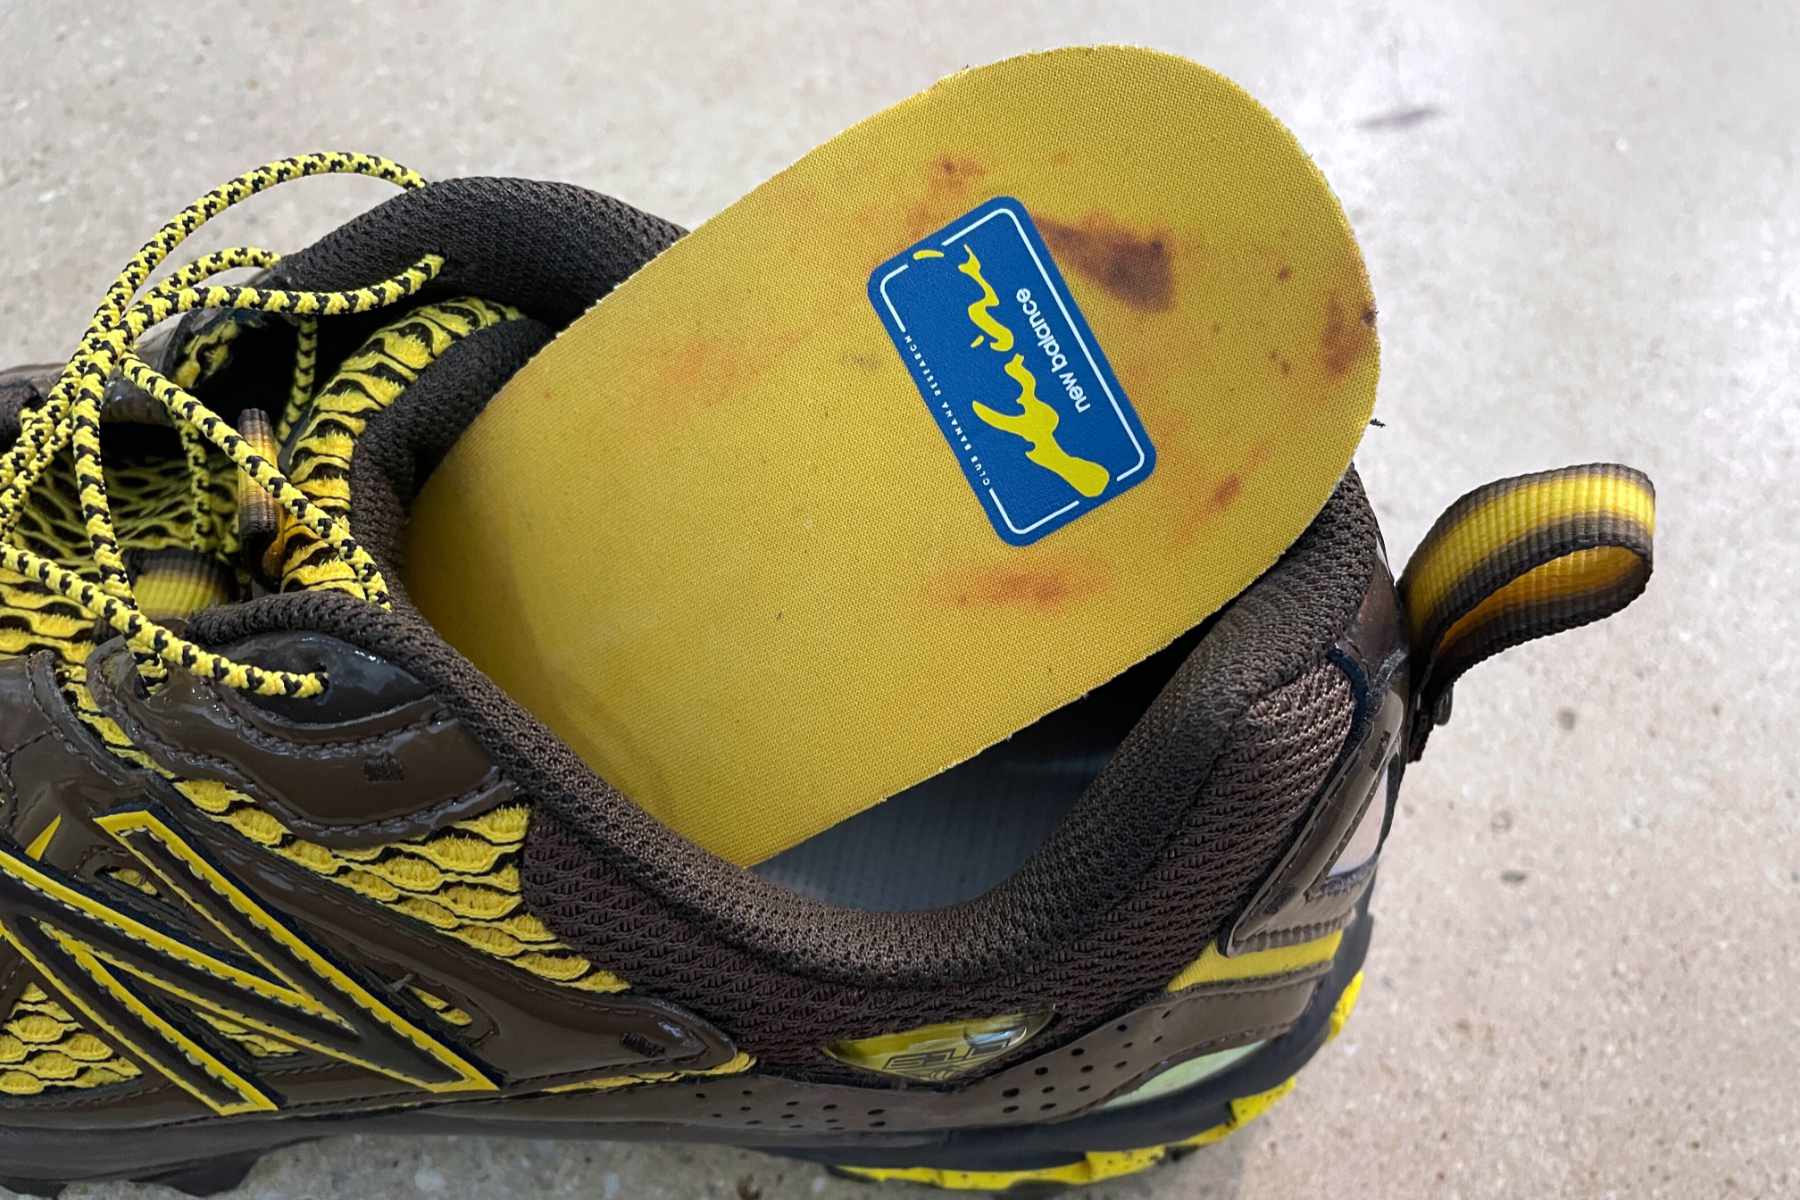 Amine's New Balance 610 shoe, "The Mooz," in brown and yellow colors with a banana-themed insole